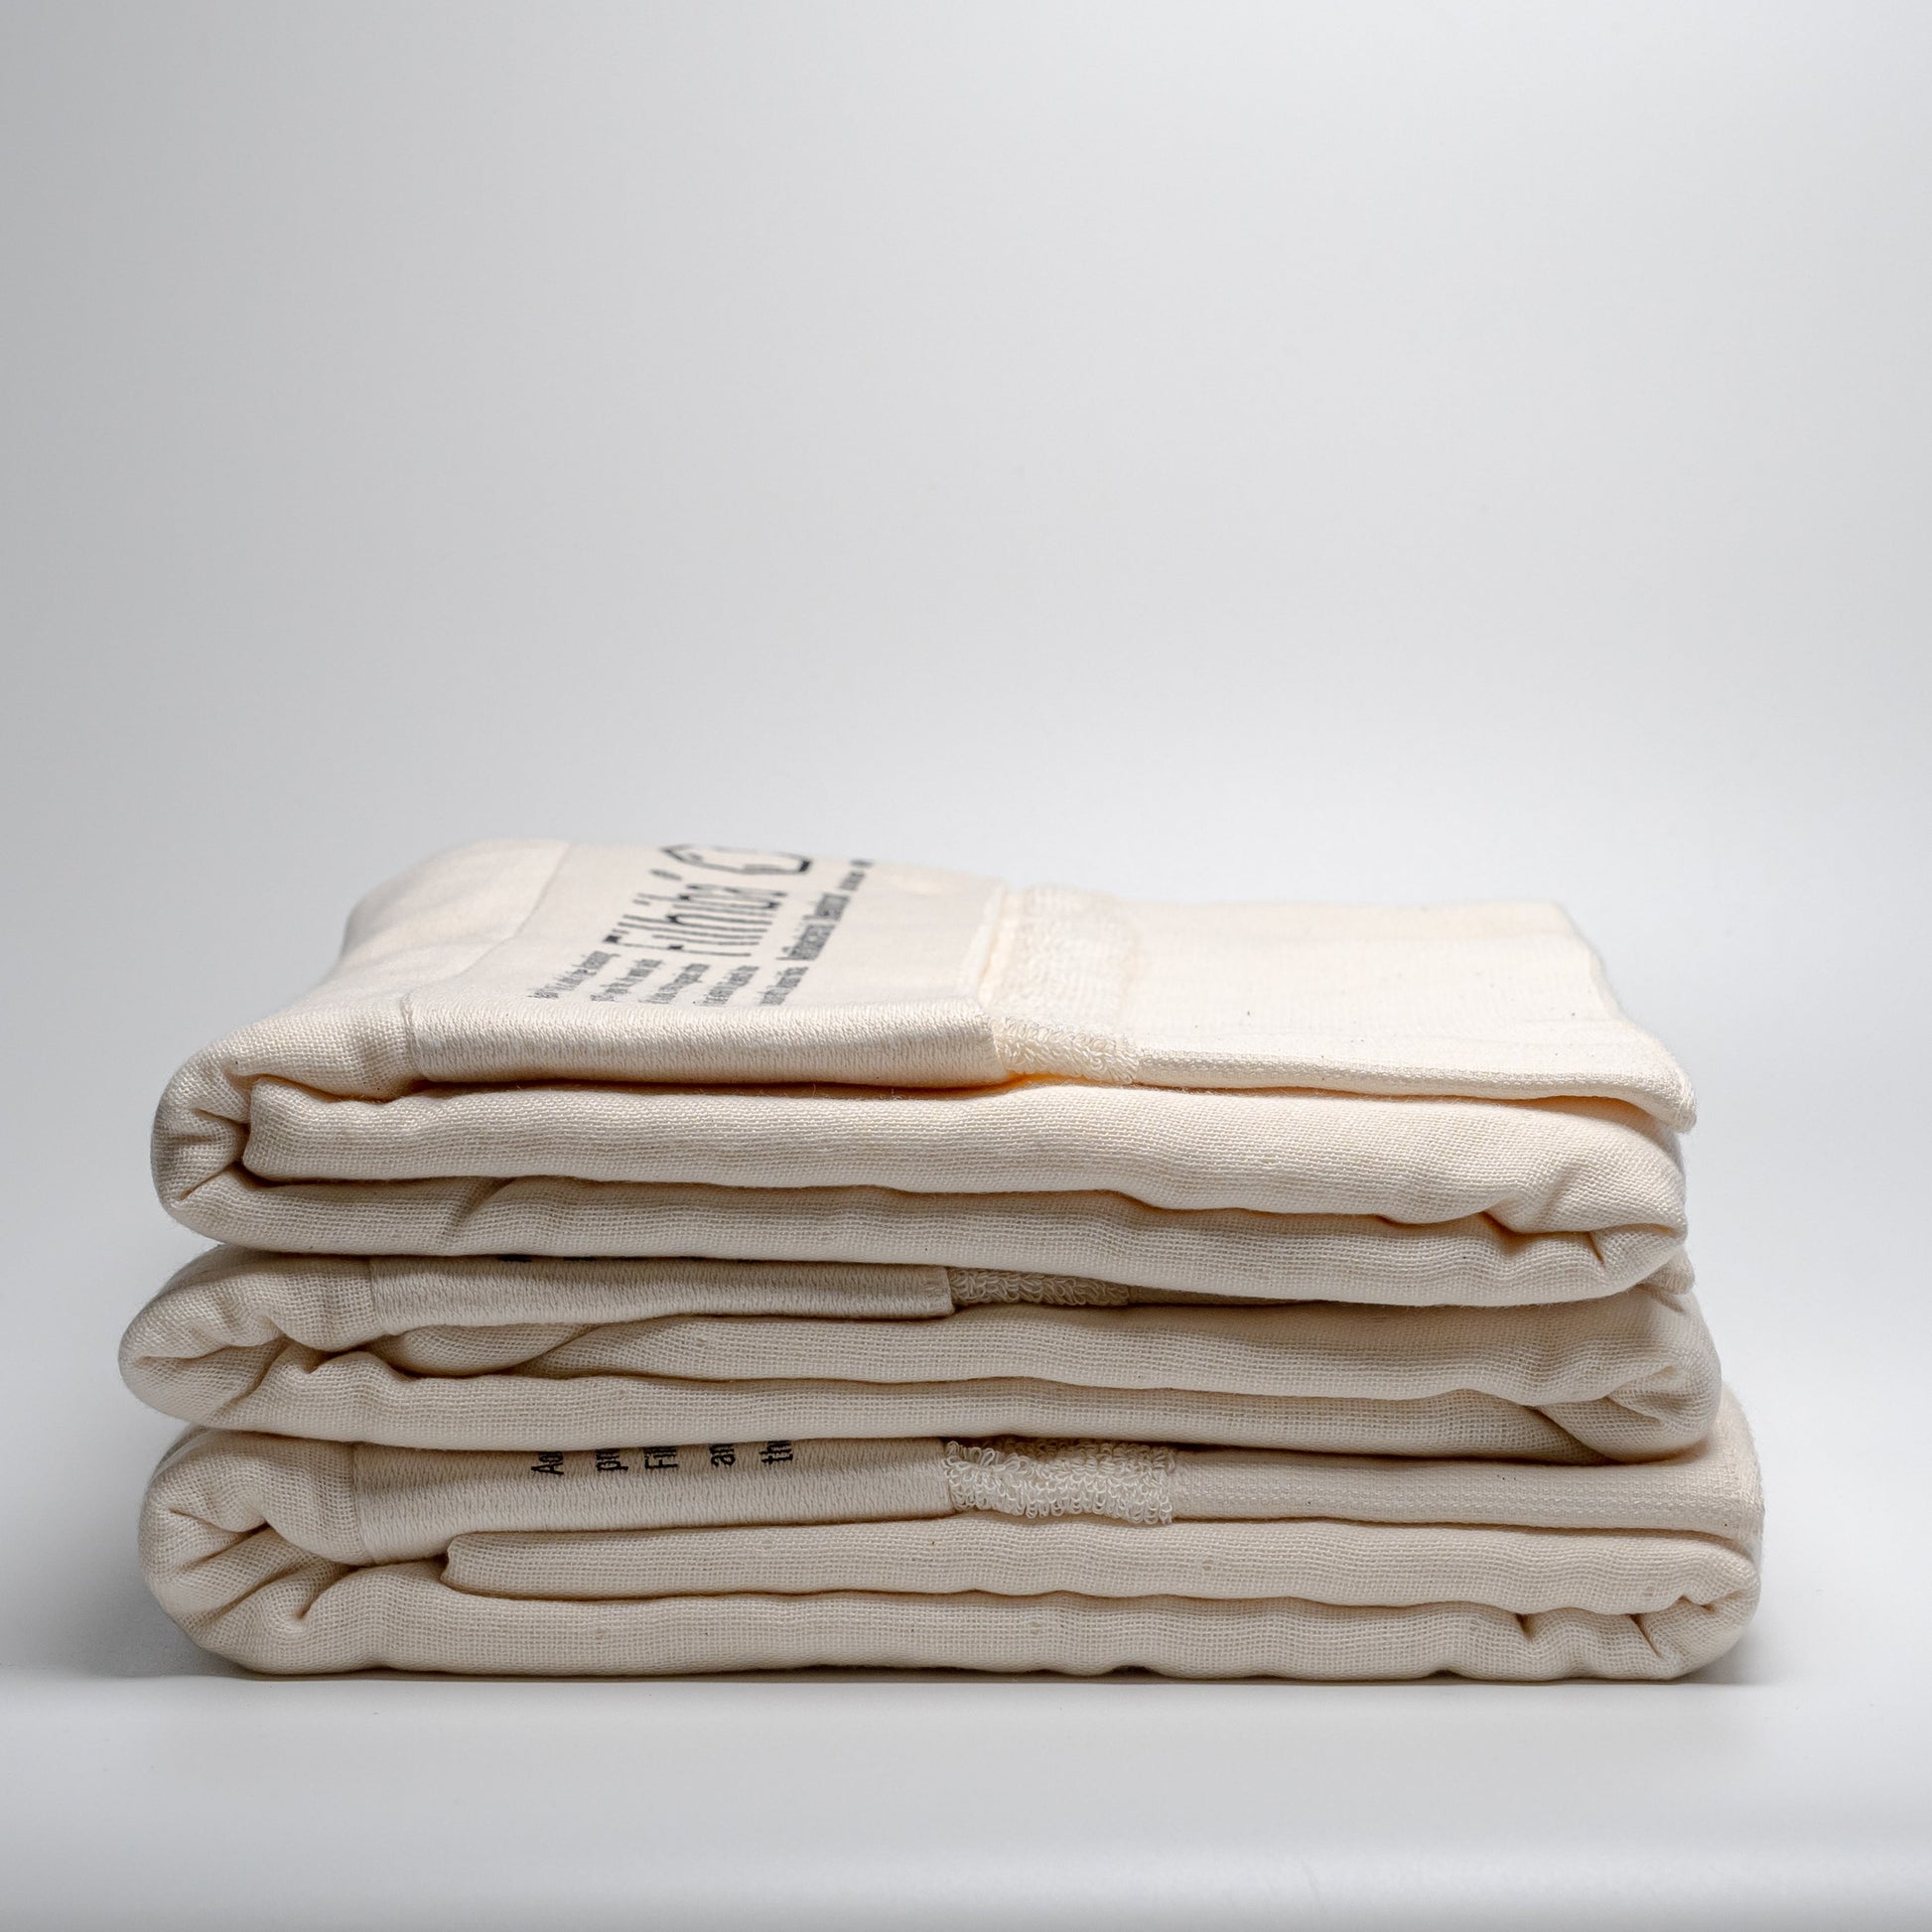 A stack of natural Filhiba bath towels on a white background